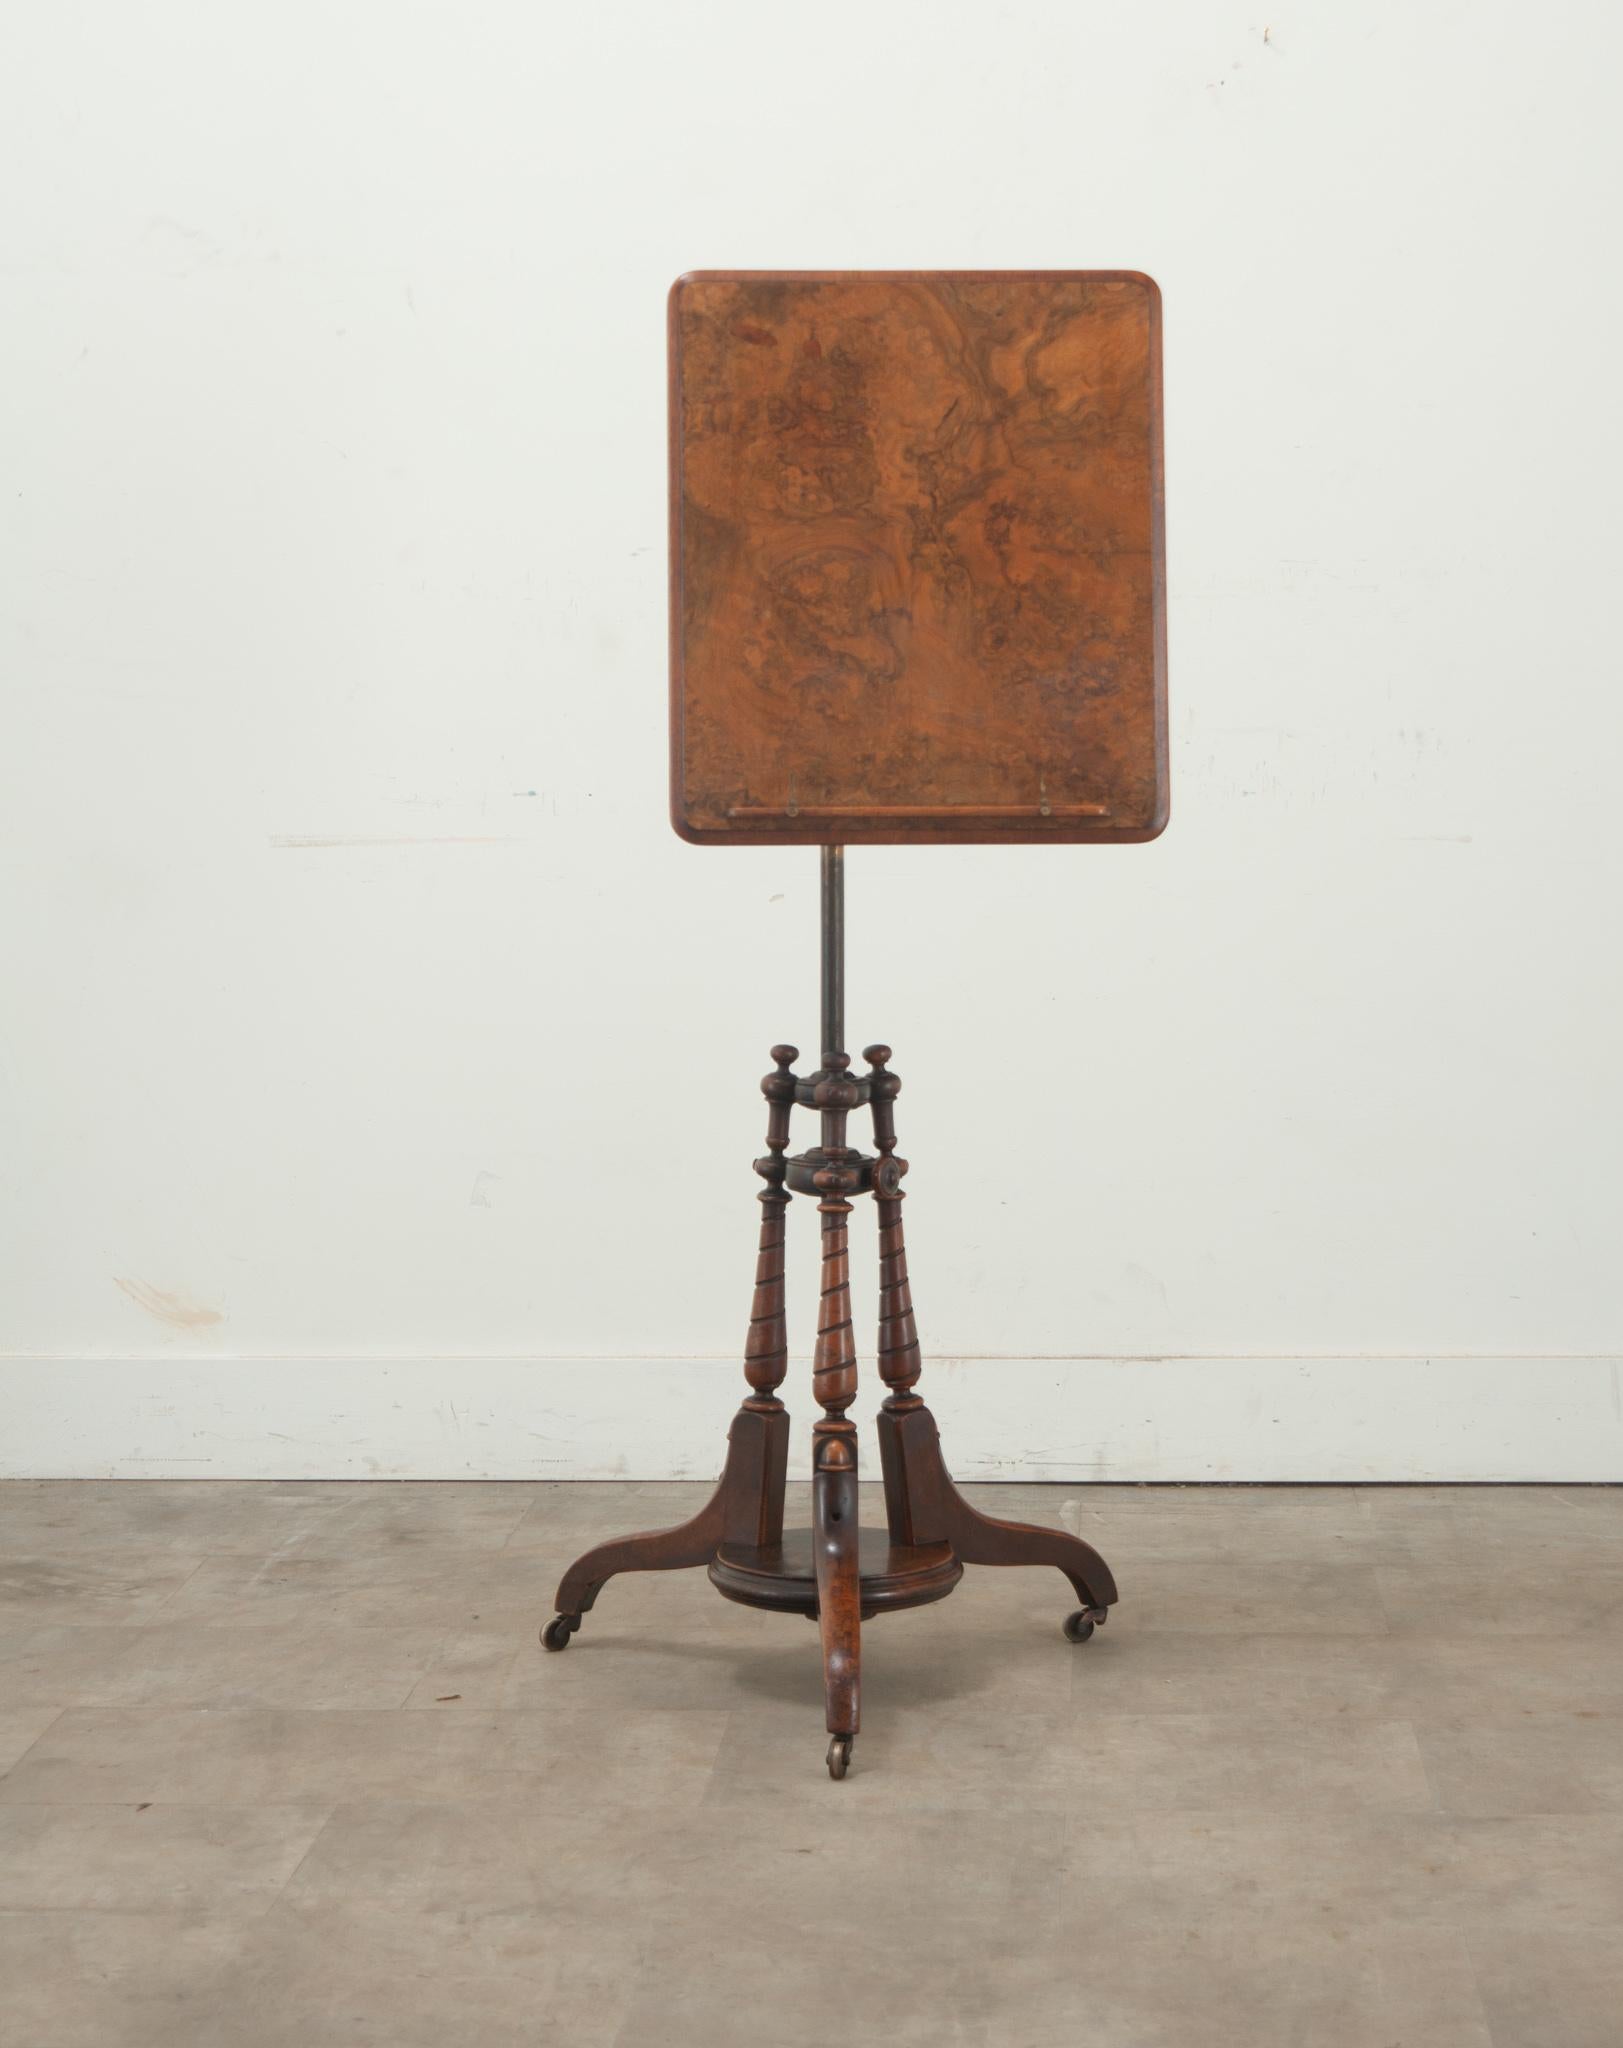 An English sheet music stand made from burl walnut and copper. This sheet music stand is unique with its burl walnut table top and copper center which allows the top to swivel and be adjusted. The stand is raised on a carved and turned pedestal base